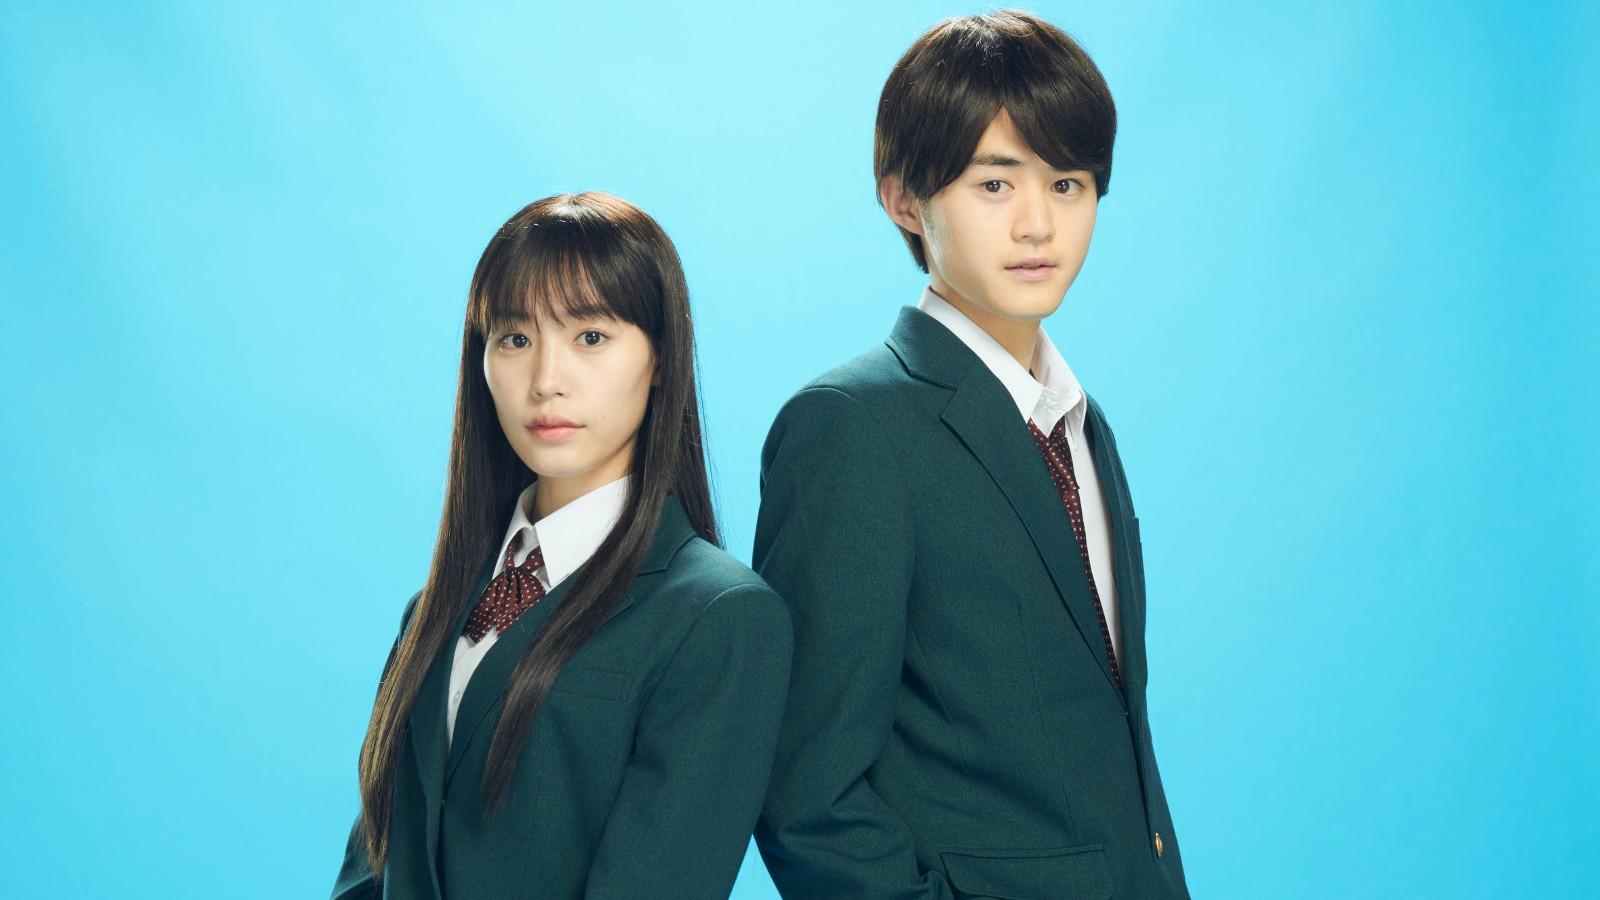 The stars of the live-action From Me to You: Kimi ni Todoke series on Netflix